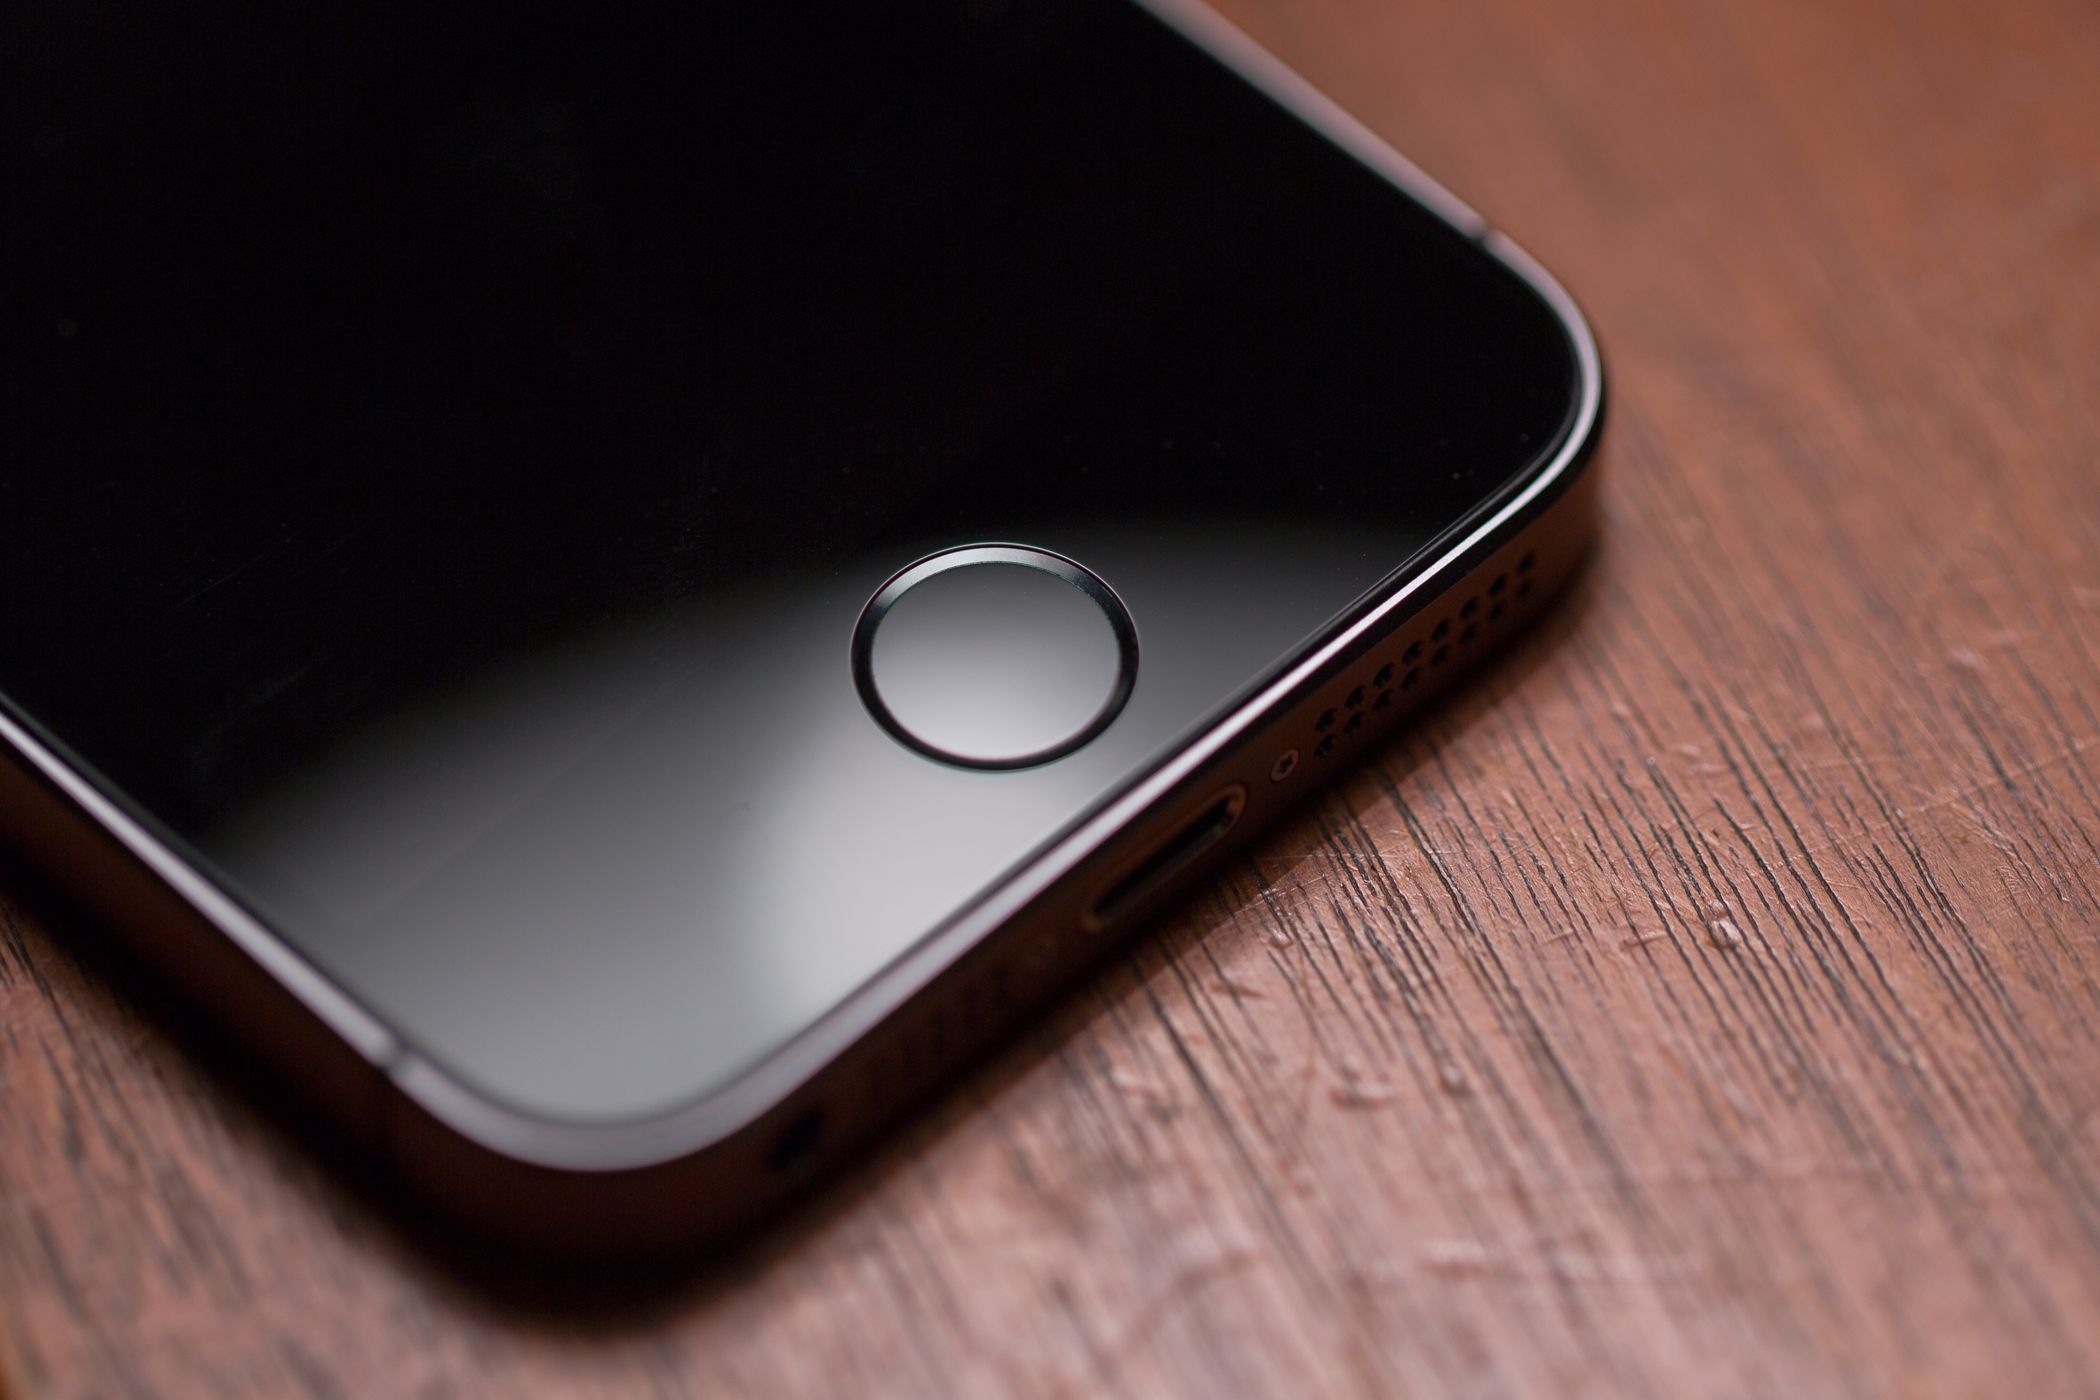 Cropped shot of iPhone 5s showing its home button